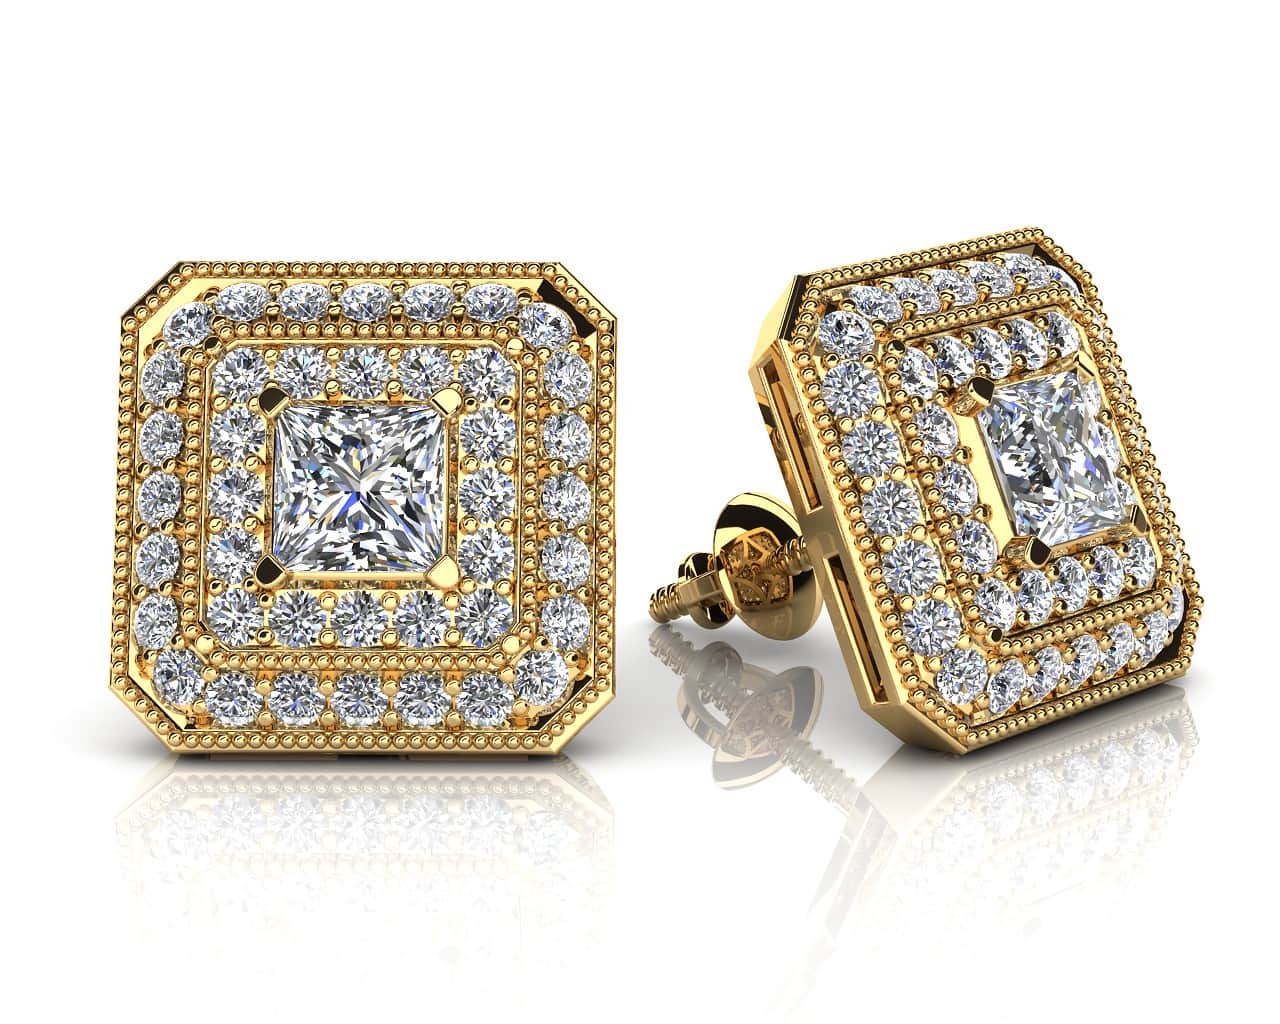 Square Shaped Princess Cut and Round Diamond Stud Earrings 0.71 Carat Total Weight